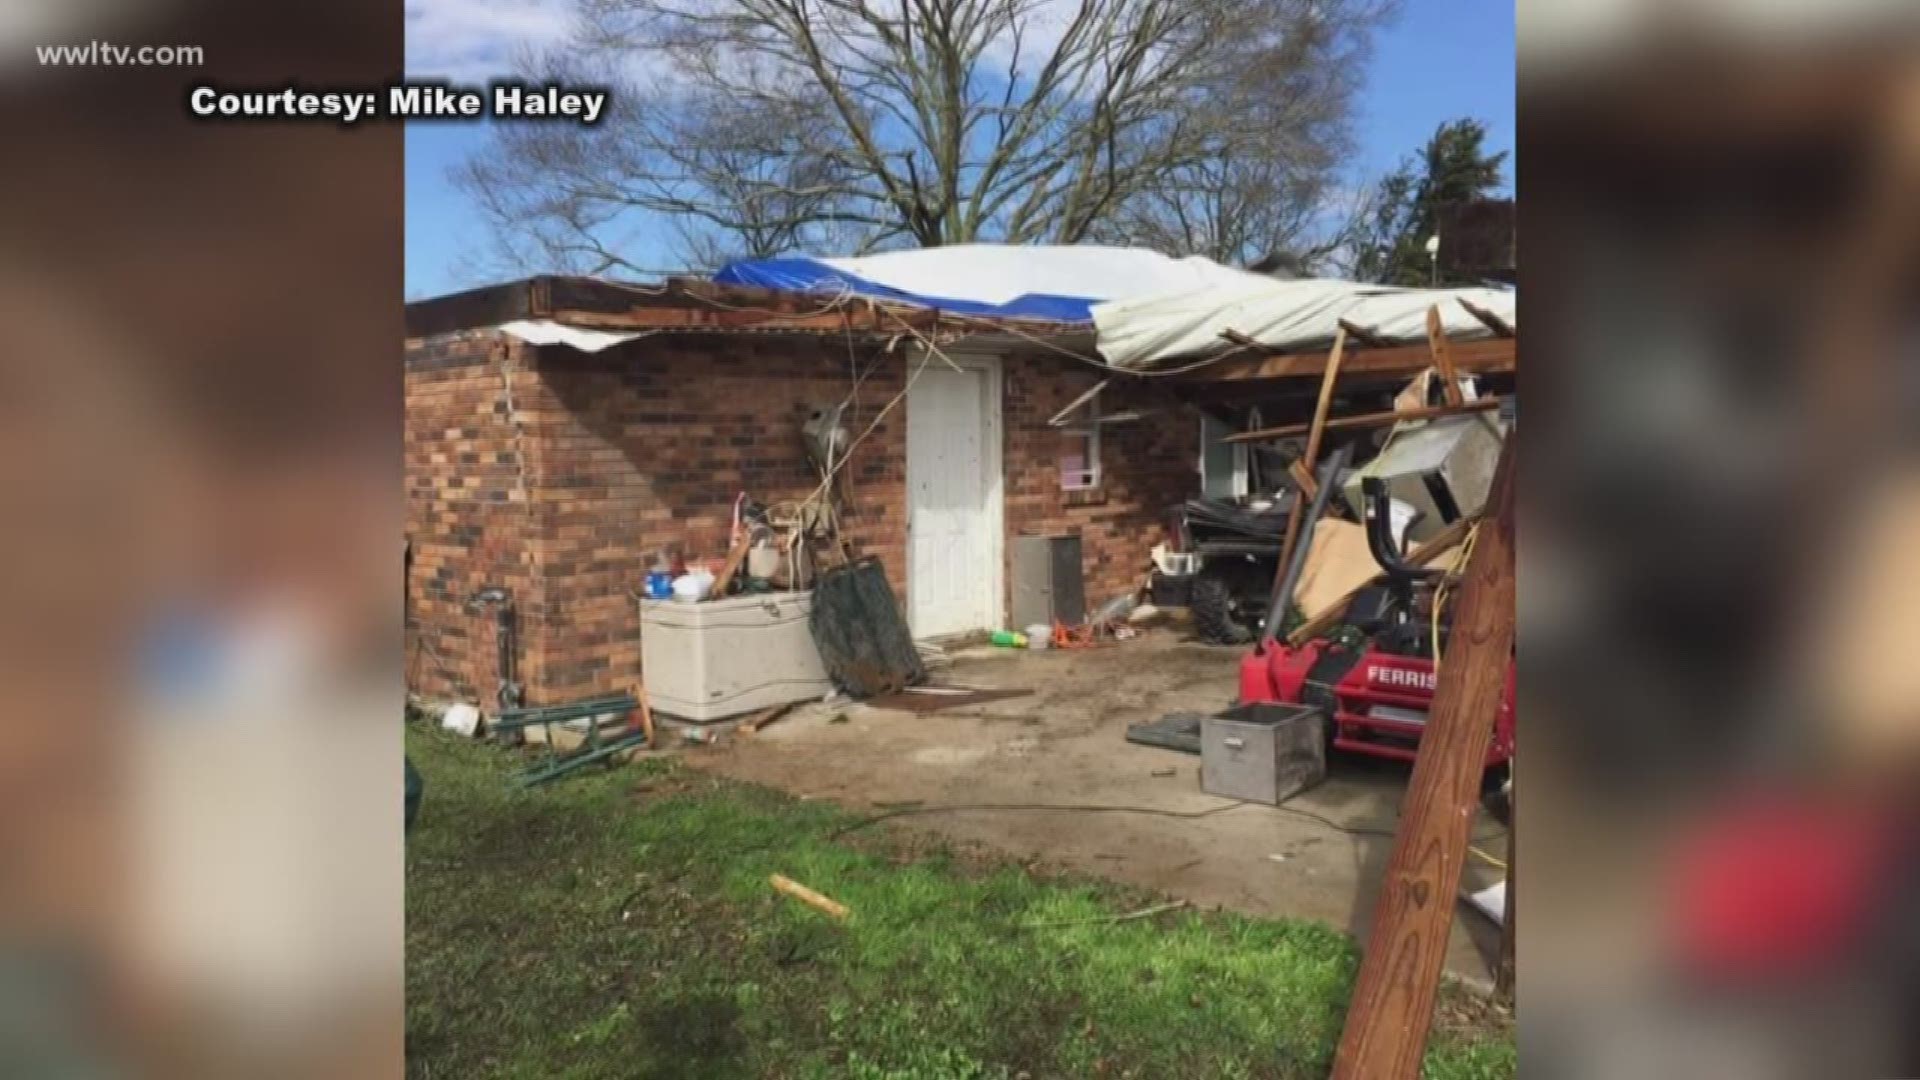 Homeowners are reporting damaged property from strong winds that blew through parts of Washington Parish.